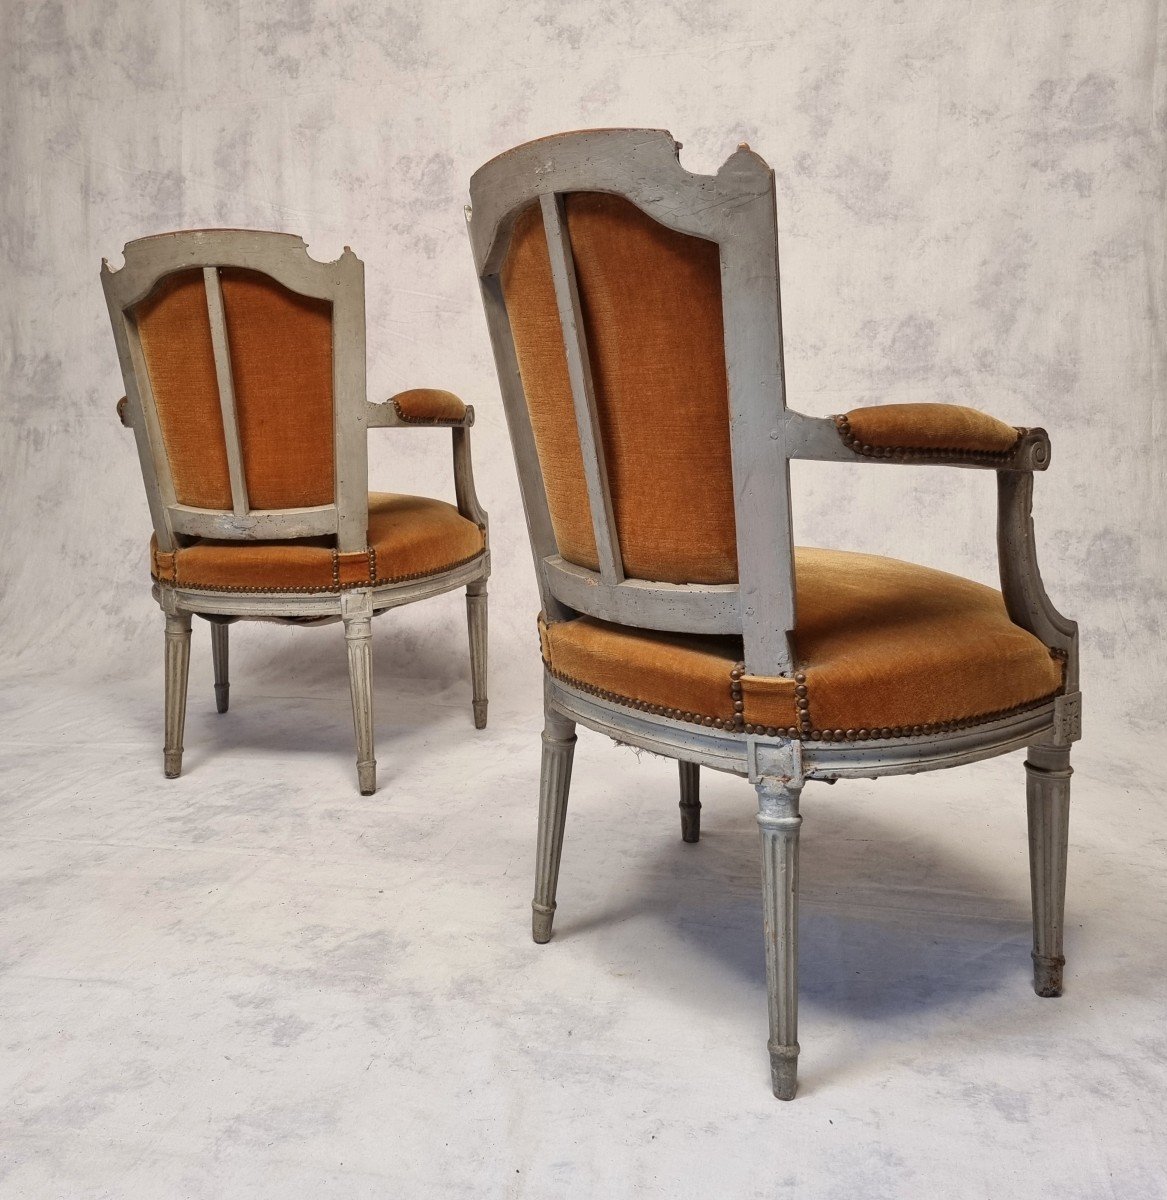 Pair Of Louis XVI Armchairs - Lacquered Wood - 18th-photo-2